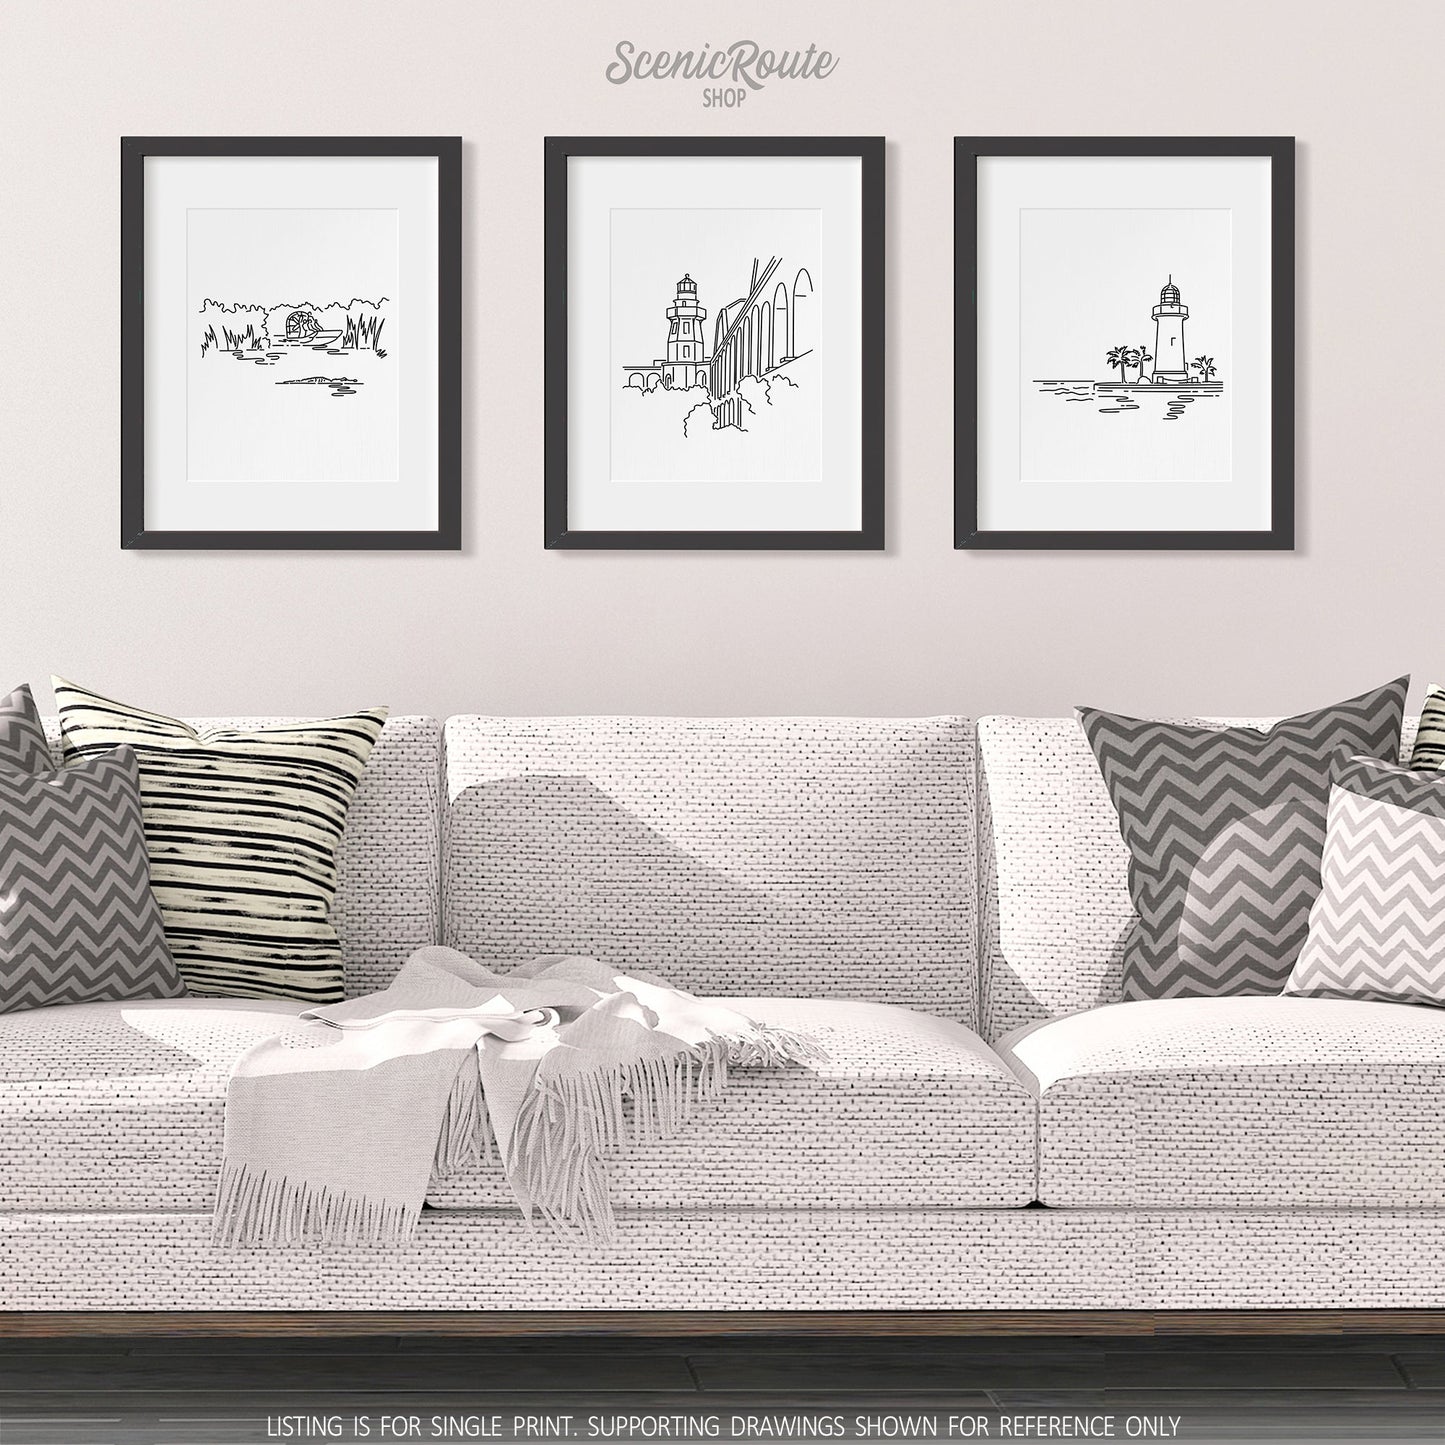 A group of three framed drawings on a white wall hanging above a couch with pillows and a blanket. The line art drawings include Everglades National Park, Dry Tortugas National Park, and Biscayne National Park